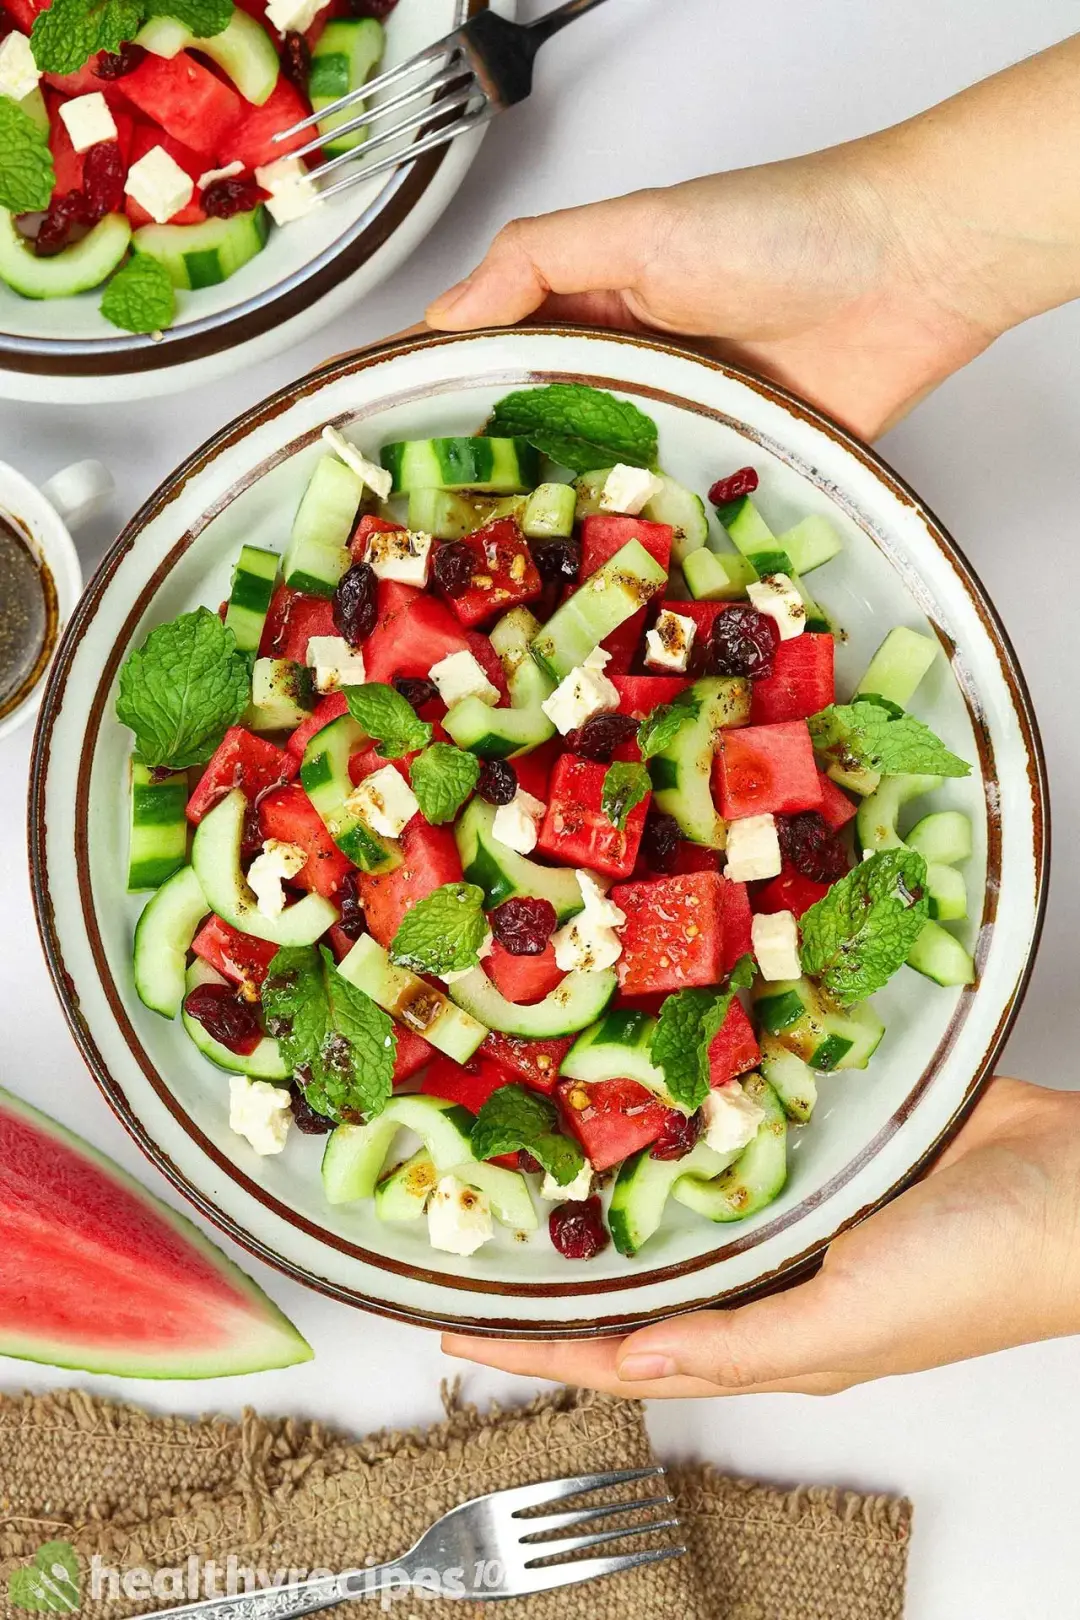 How to Store Leftovers Watermelon Cucumber Salad